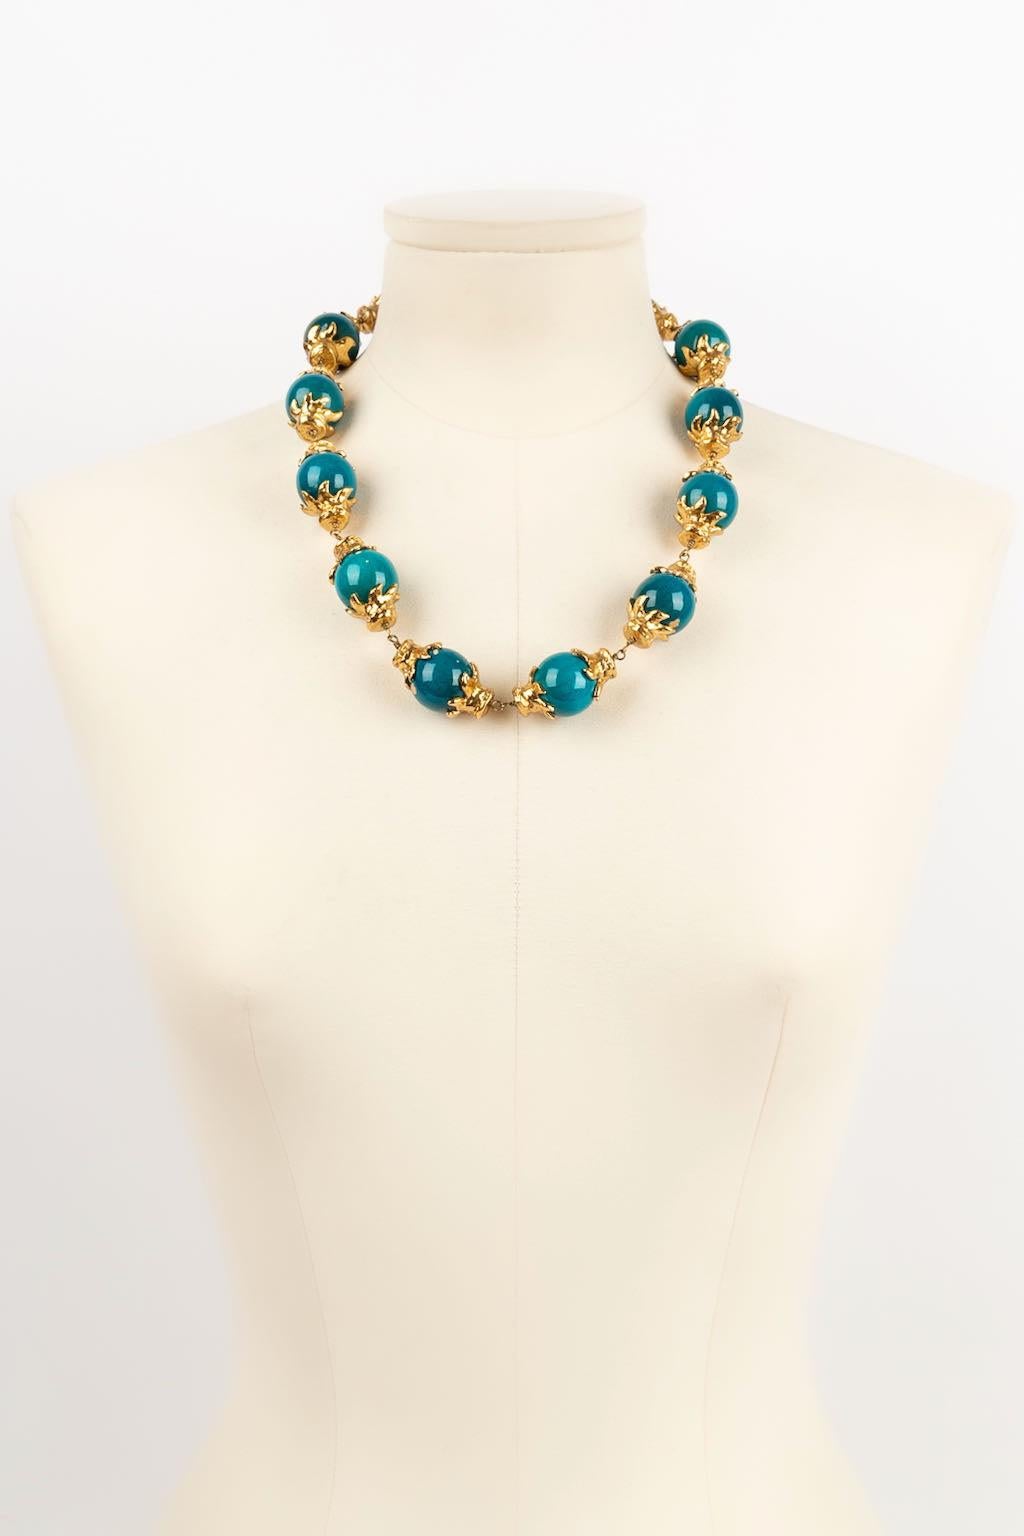 Yves Saint Laurent - (Made in France) Gold plated metal necklace with blue wooden beads.

Additional information: 
Dimensions: Length: from 53 cm to 58 cm
Condition: Good condition
Seller Ref number: BC63